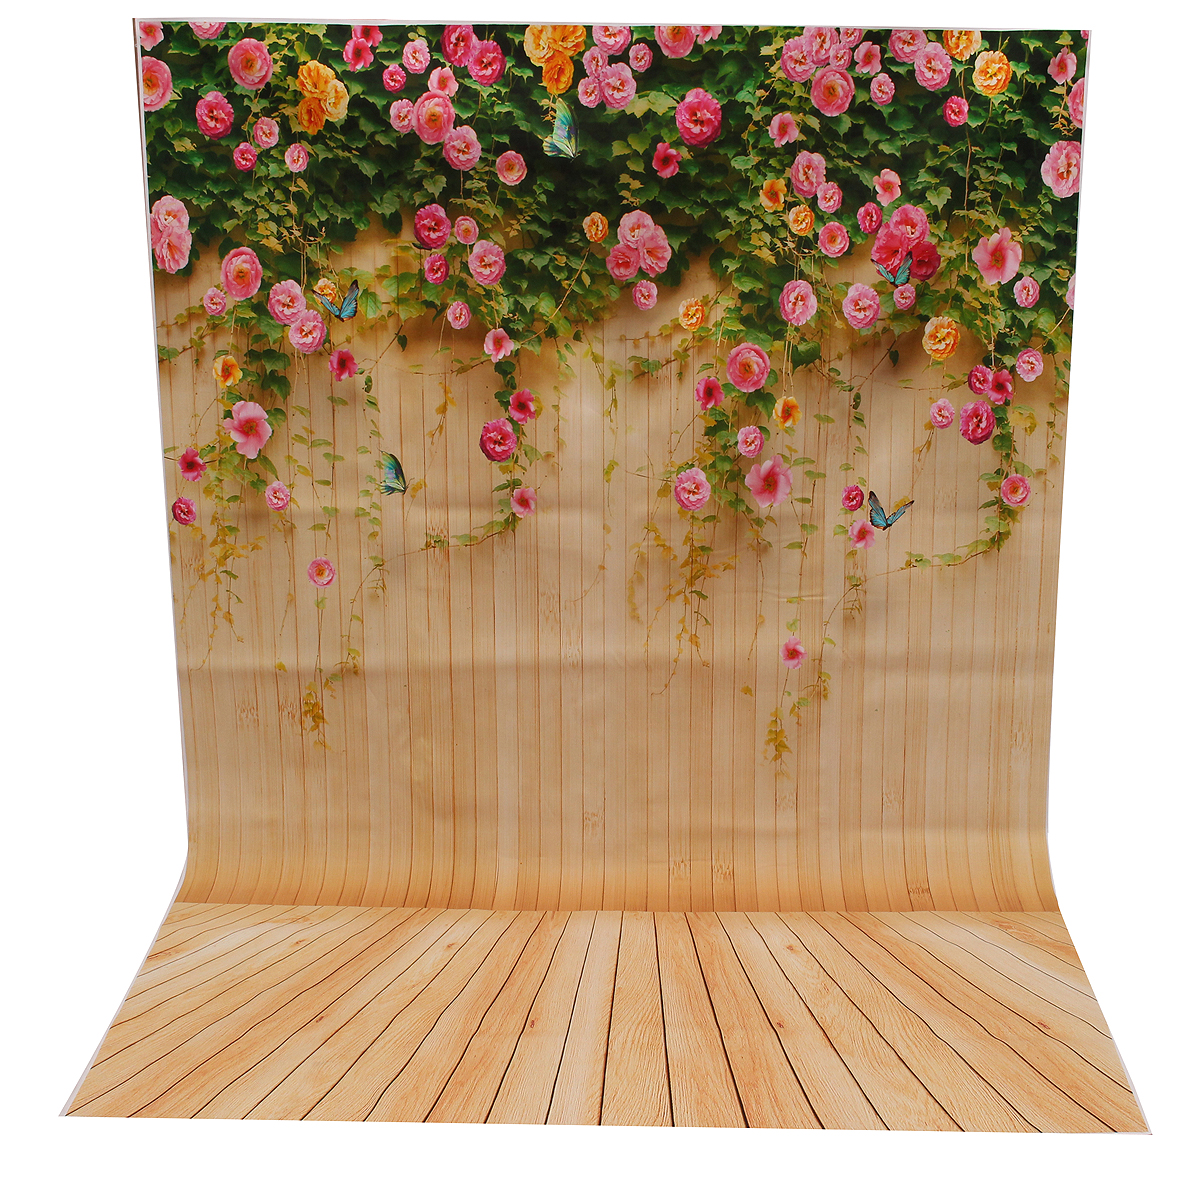 Mohoo-15x21m-Flowers-Wooden-Board-Studio-Props-Photography-Backdrop-Background-Silk-Material-1958137-2